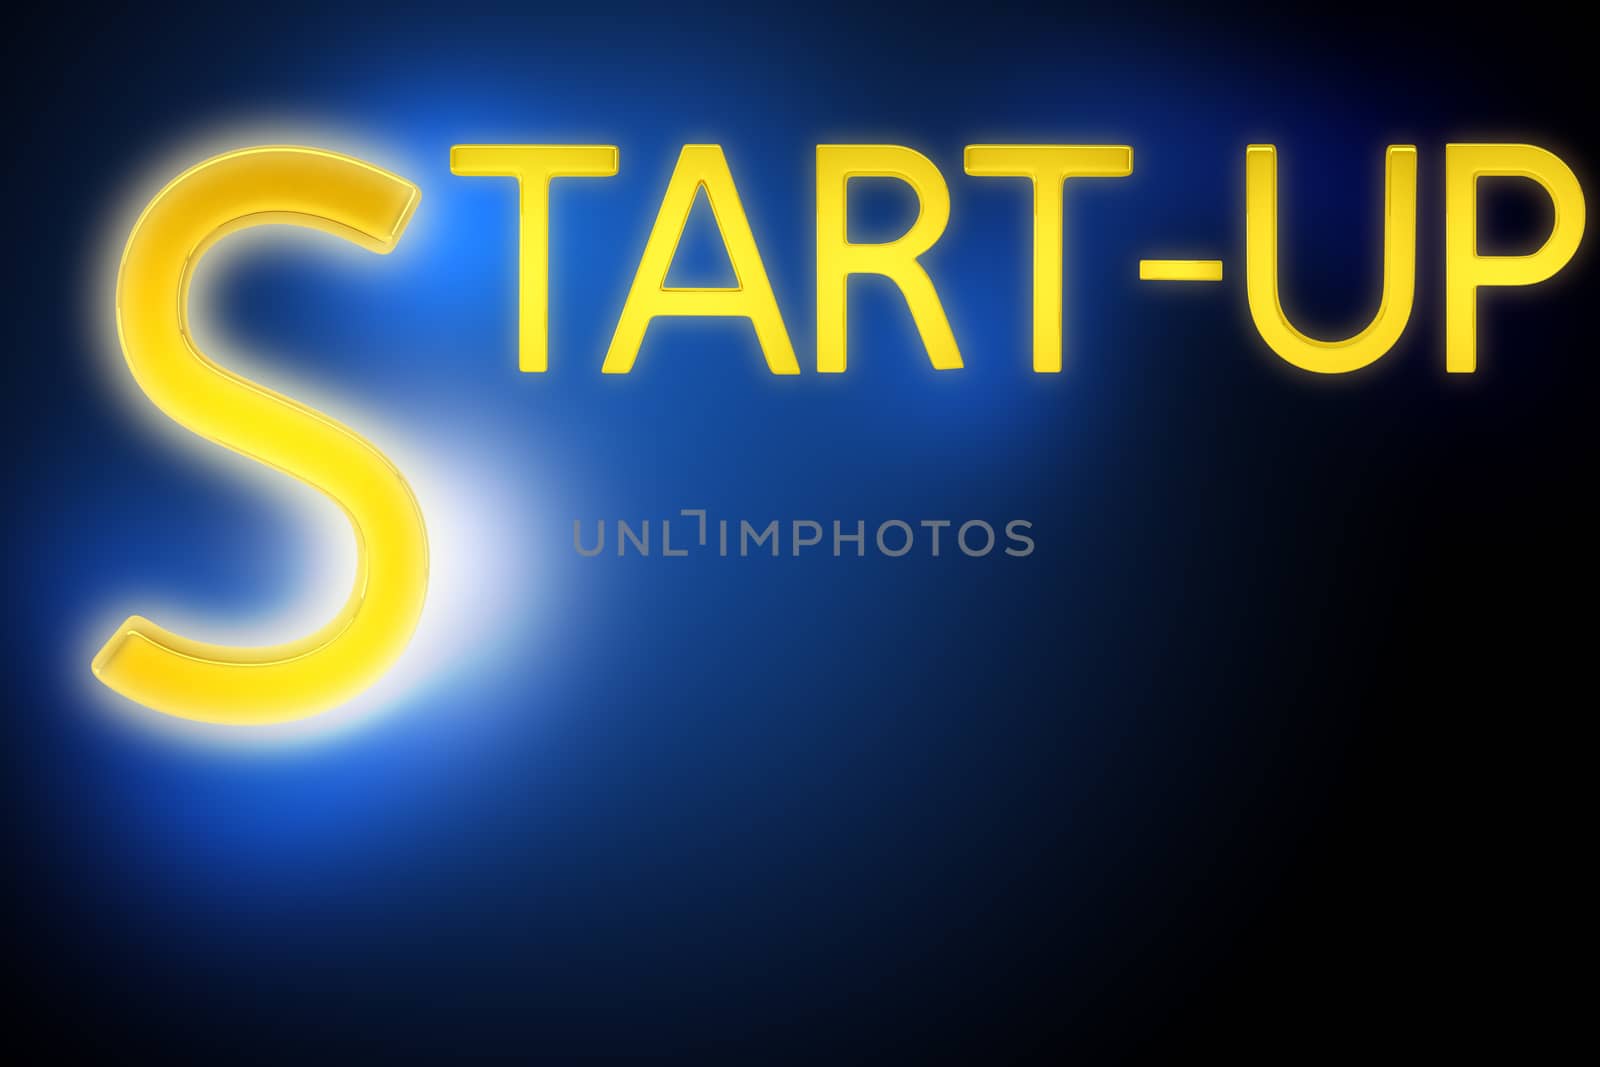 Gold word start-up on blue background, close up view